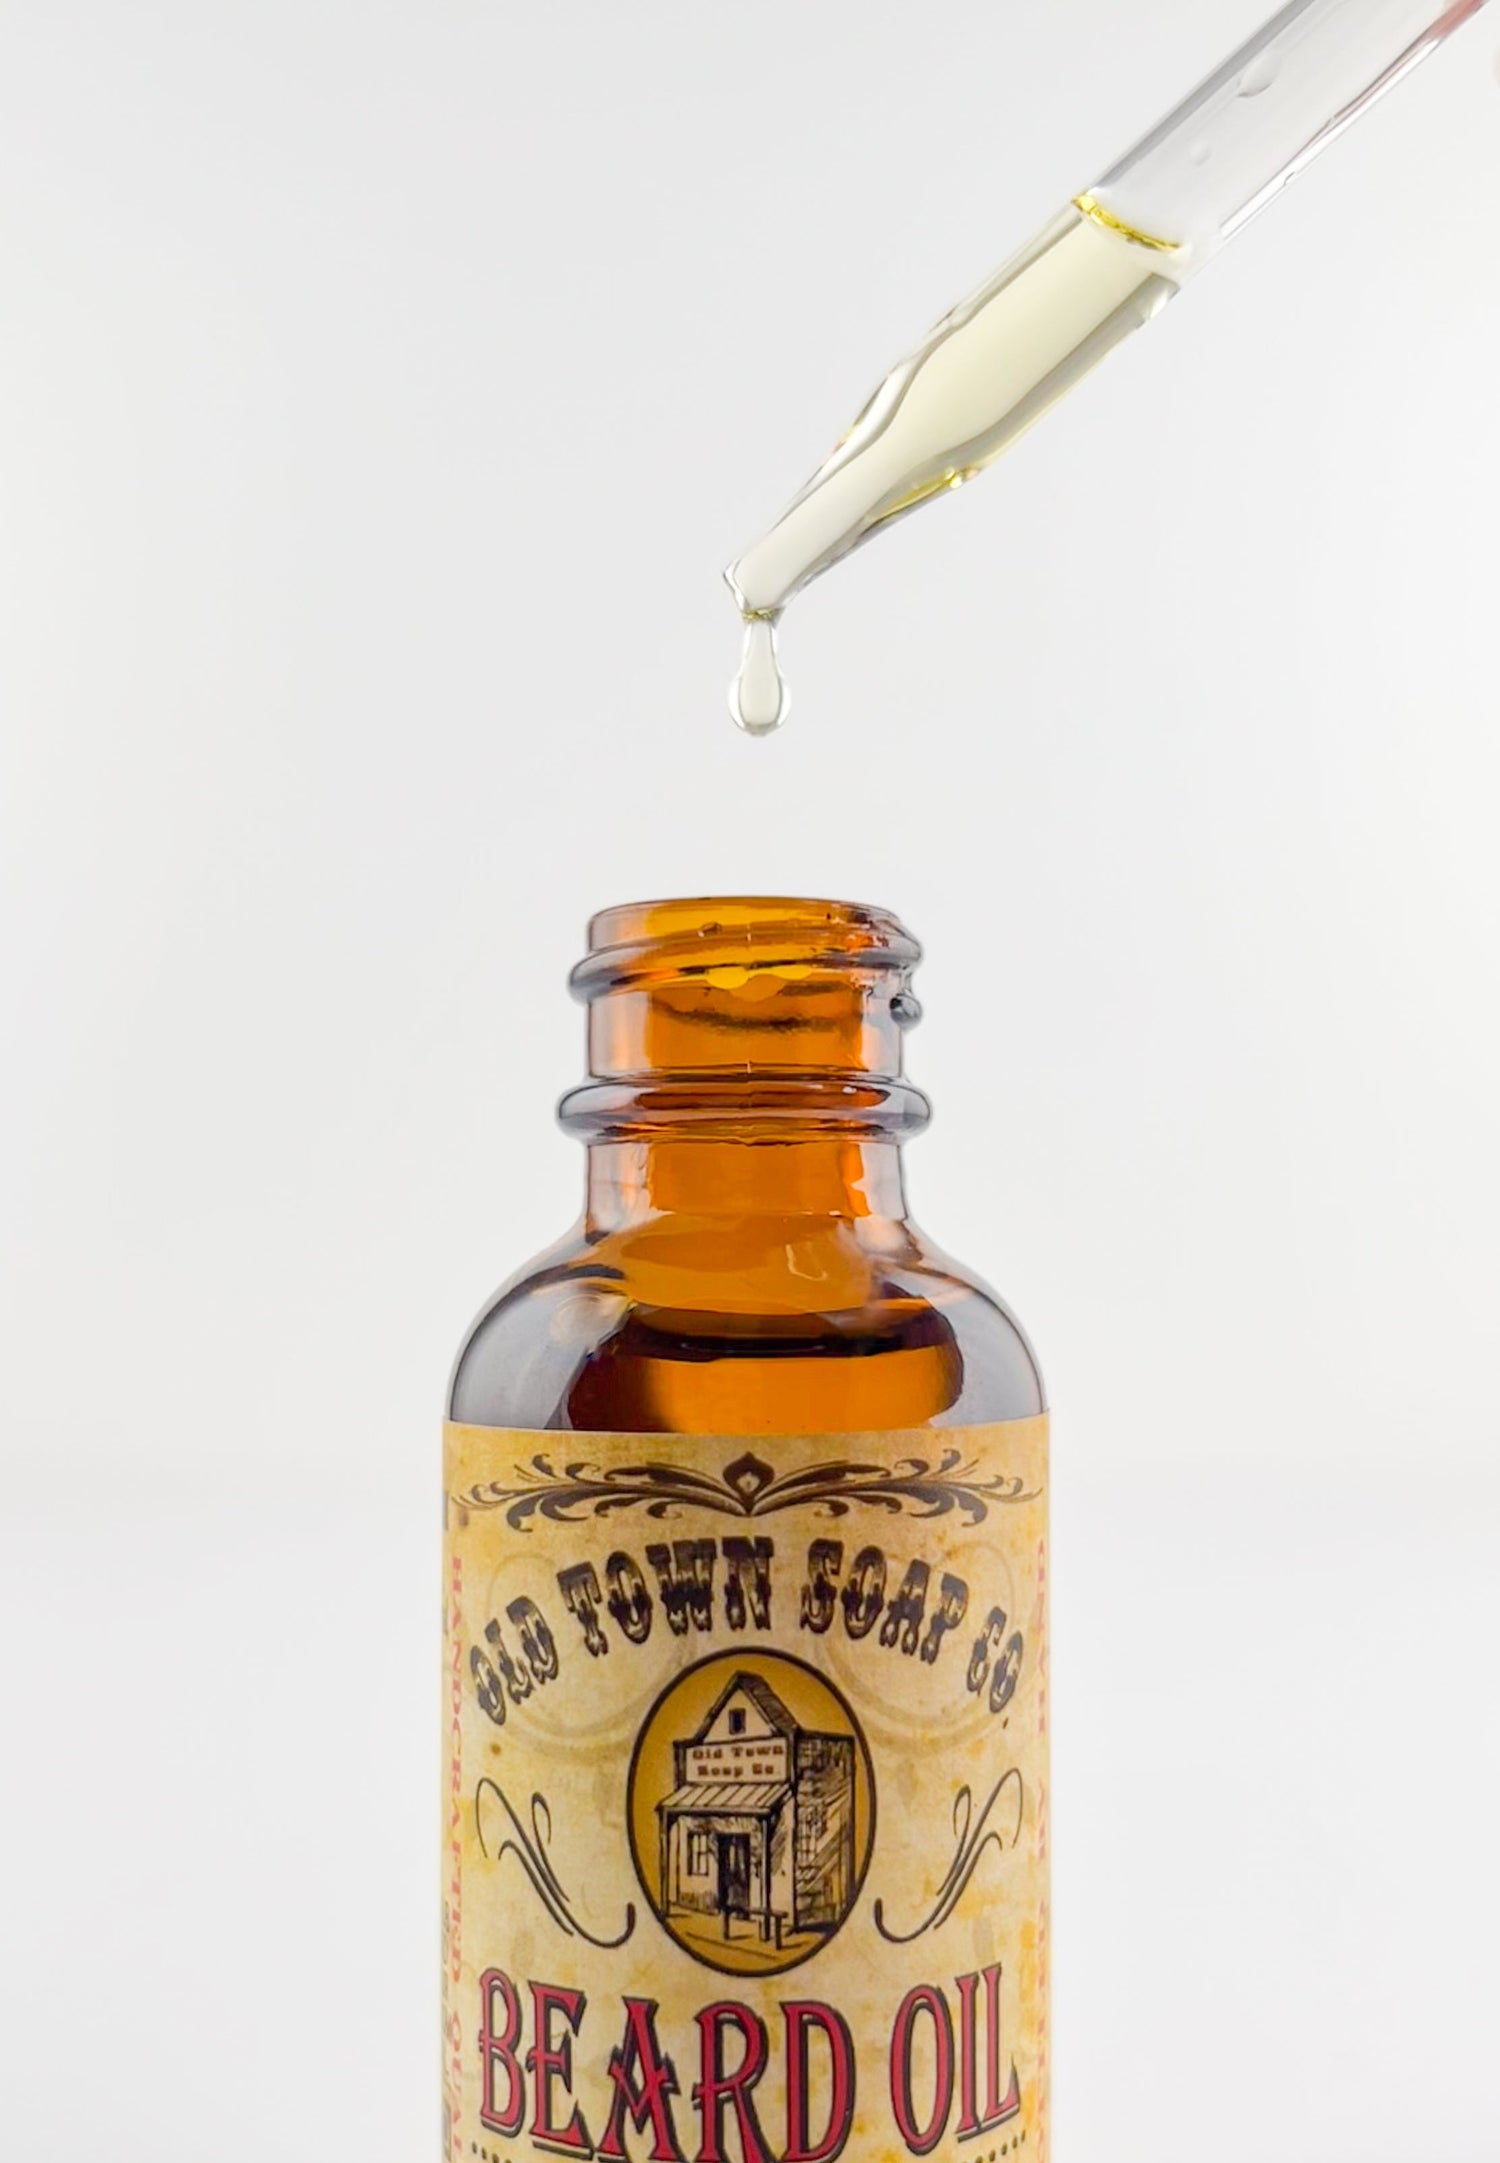 Fifty Shades Beard Oil - Old Town Soap Co.